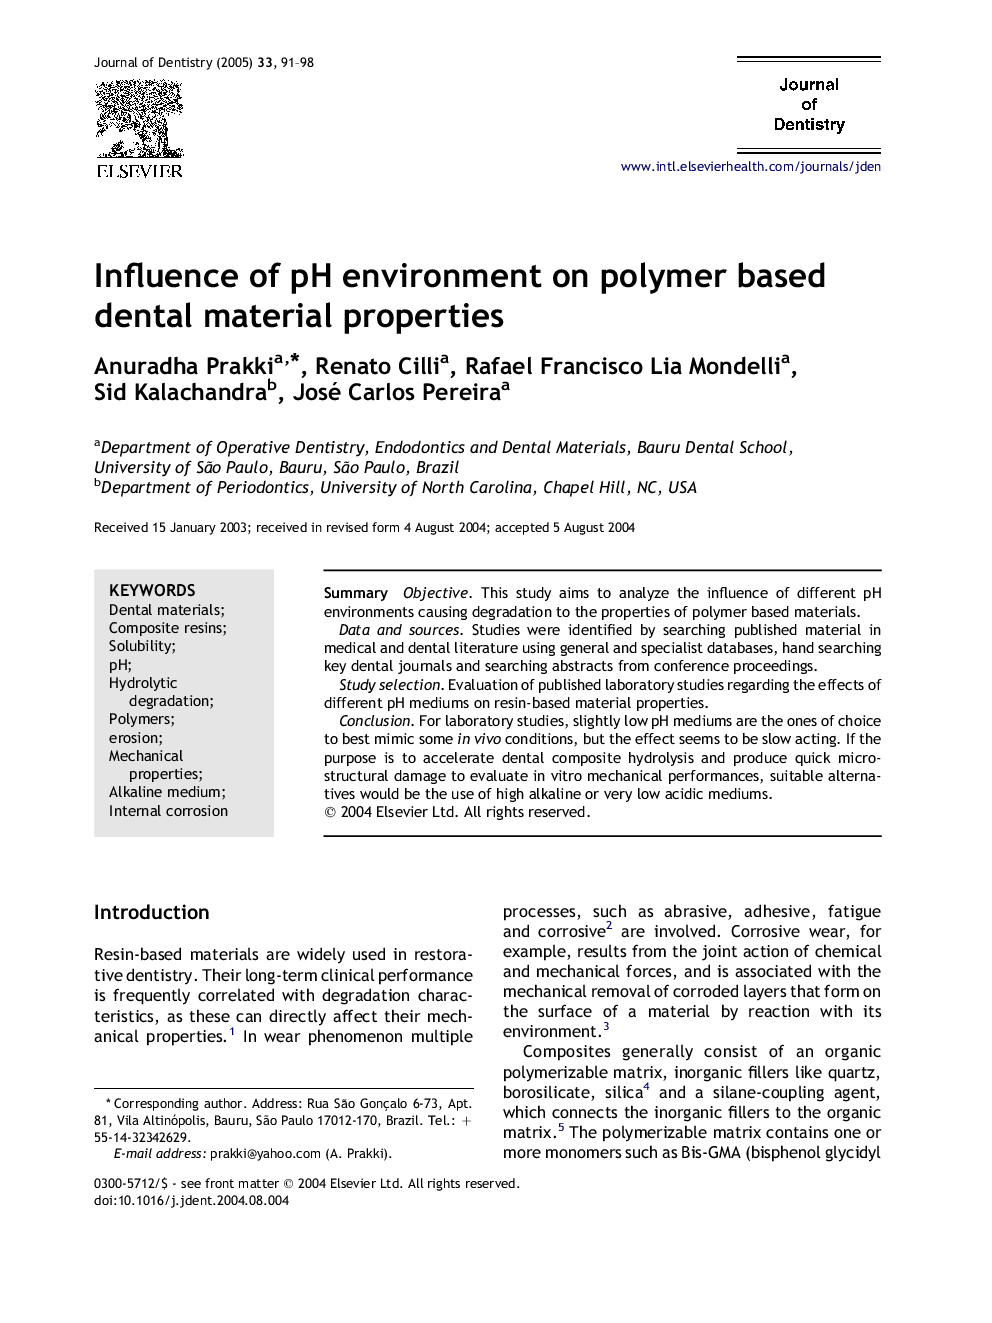 Influence of pH environment on polymer based dental material properties